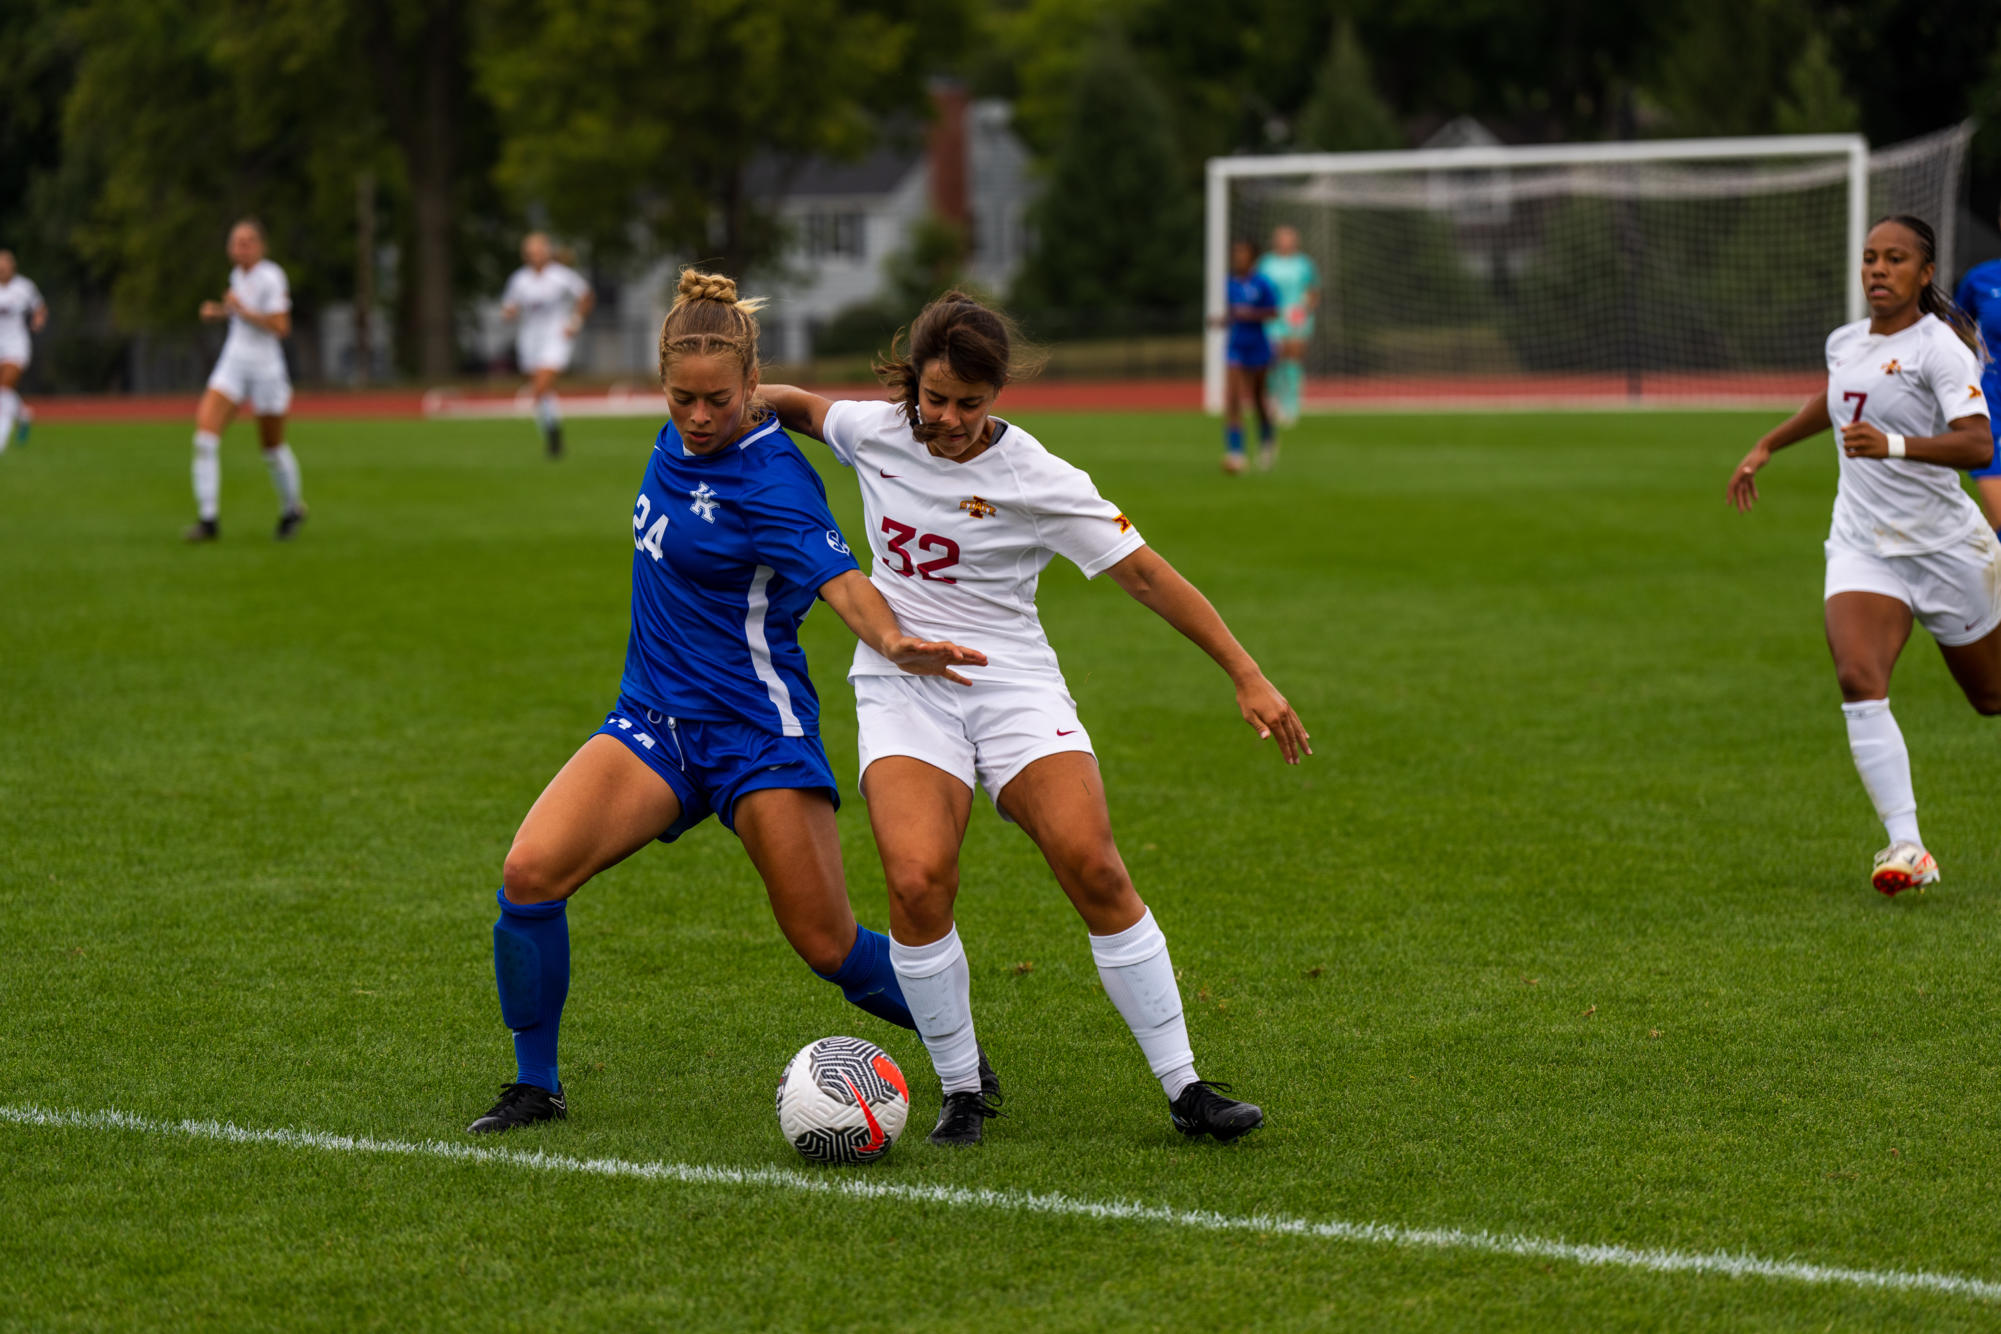 Mira Emma playing physical against Kentuckys Grace Phillpotts during the Iowa State vs. Kentucky match, Cyclone Sports Complex, Sept. 10th, 2023.